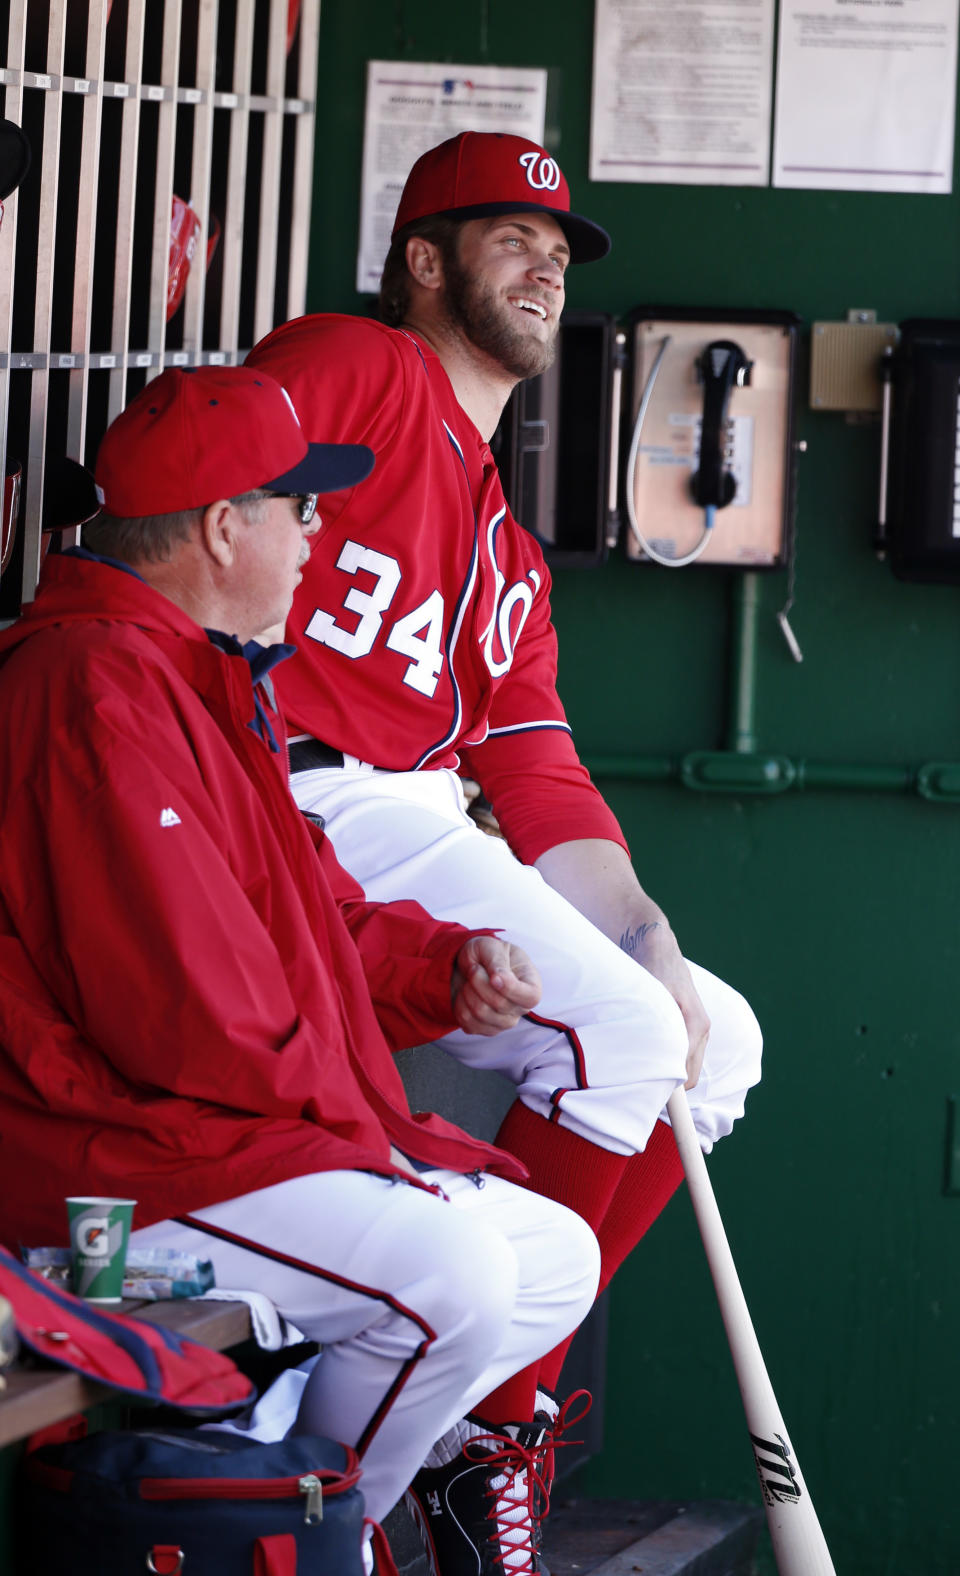 Washington Nationals left fielder Bryce Harper (34) sits on the bench during a baseball game against the Atlanta Braves at Nationals Park, Sunday, April 6, 2014, in Washington. Harper was not in the starting lineup. (AP Photo/Alex Brandon)